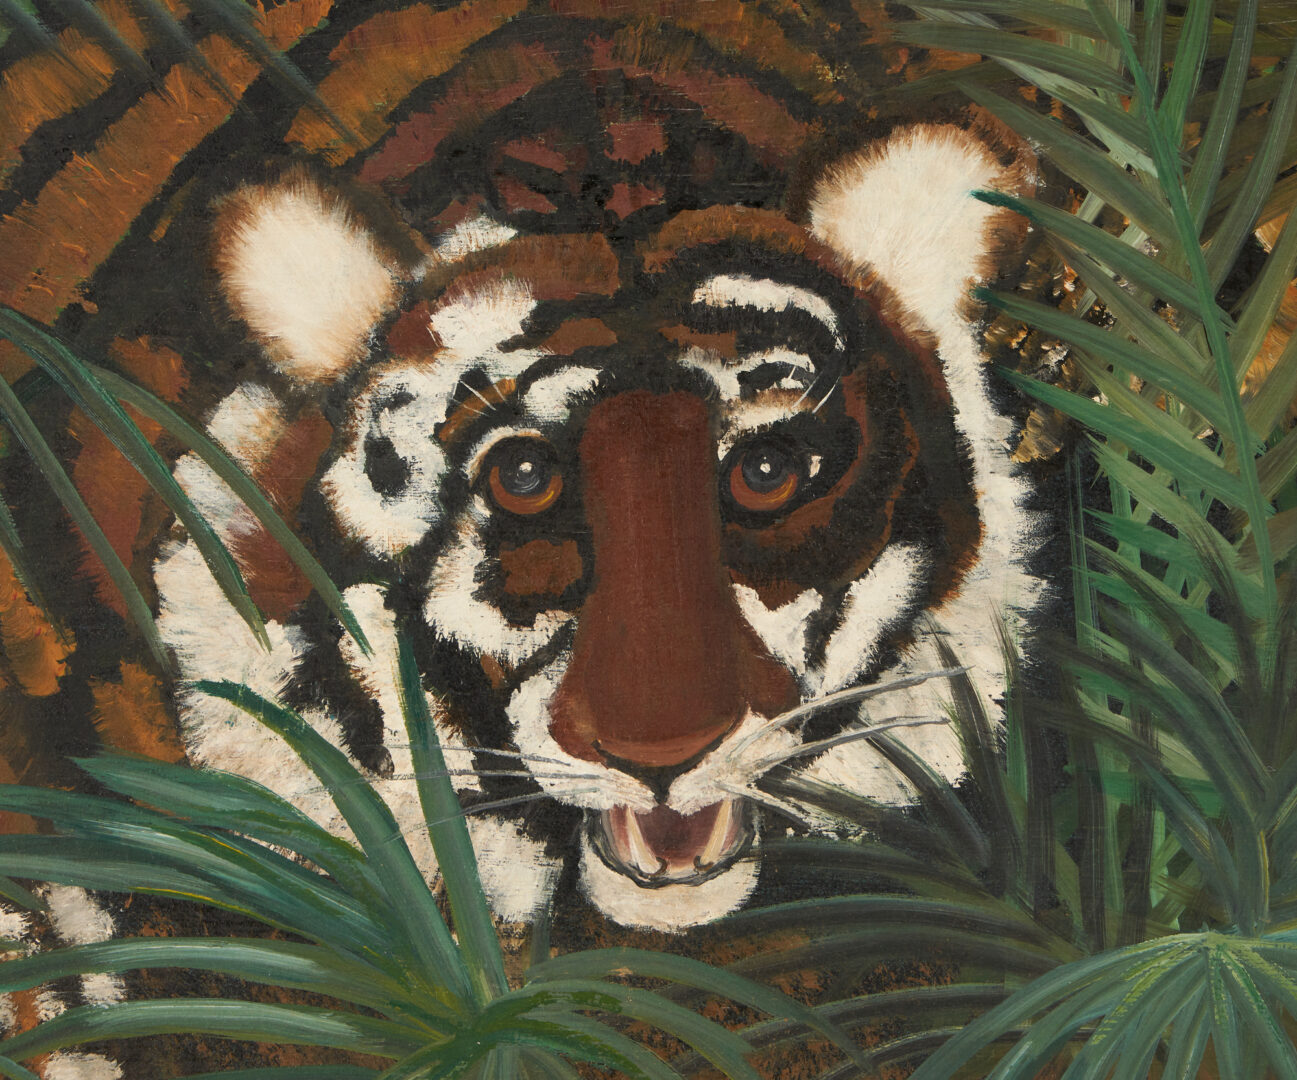 Lot 163: Large Helen LaFrance Tiger Painting